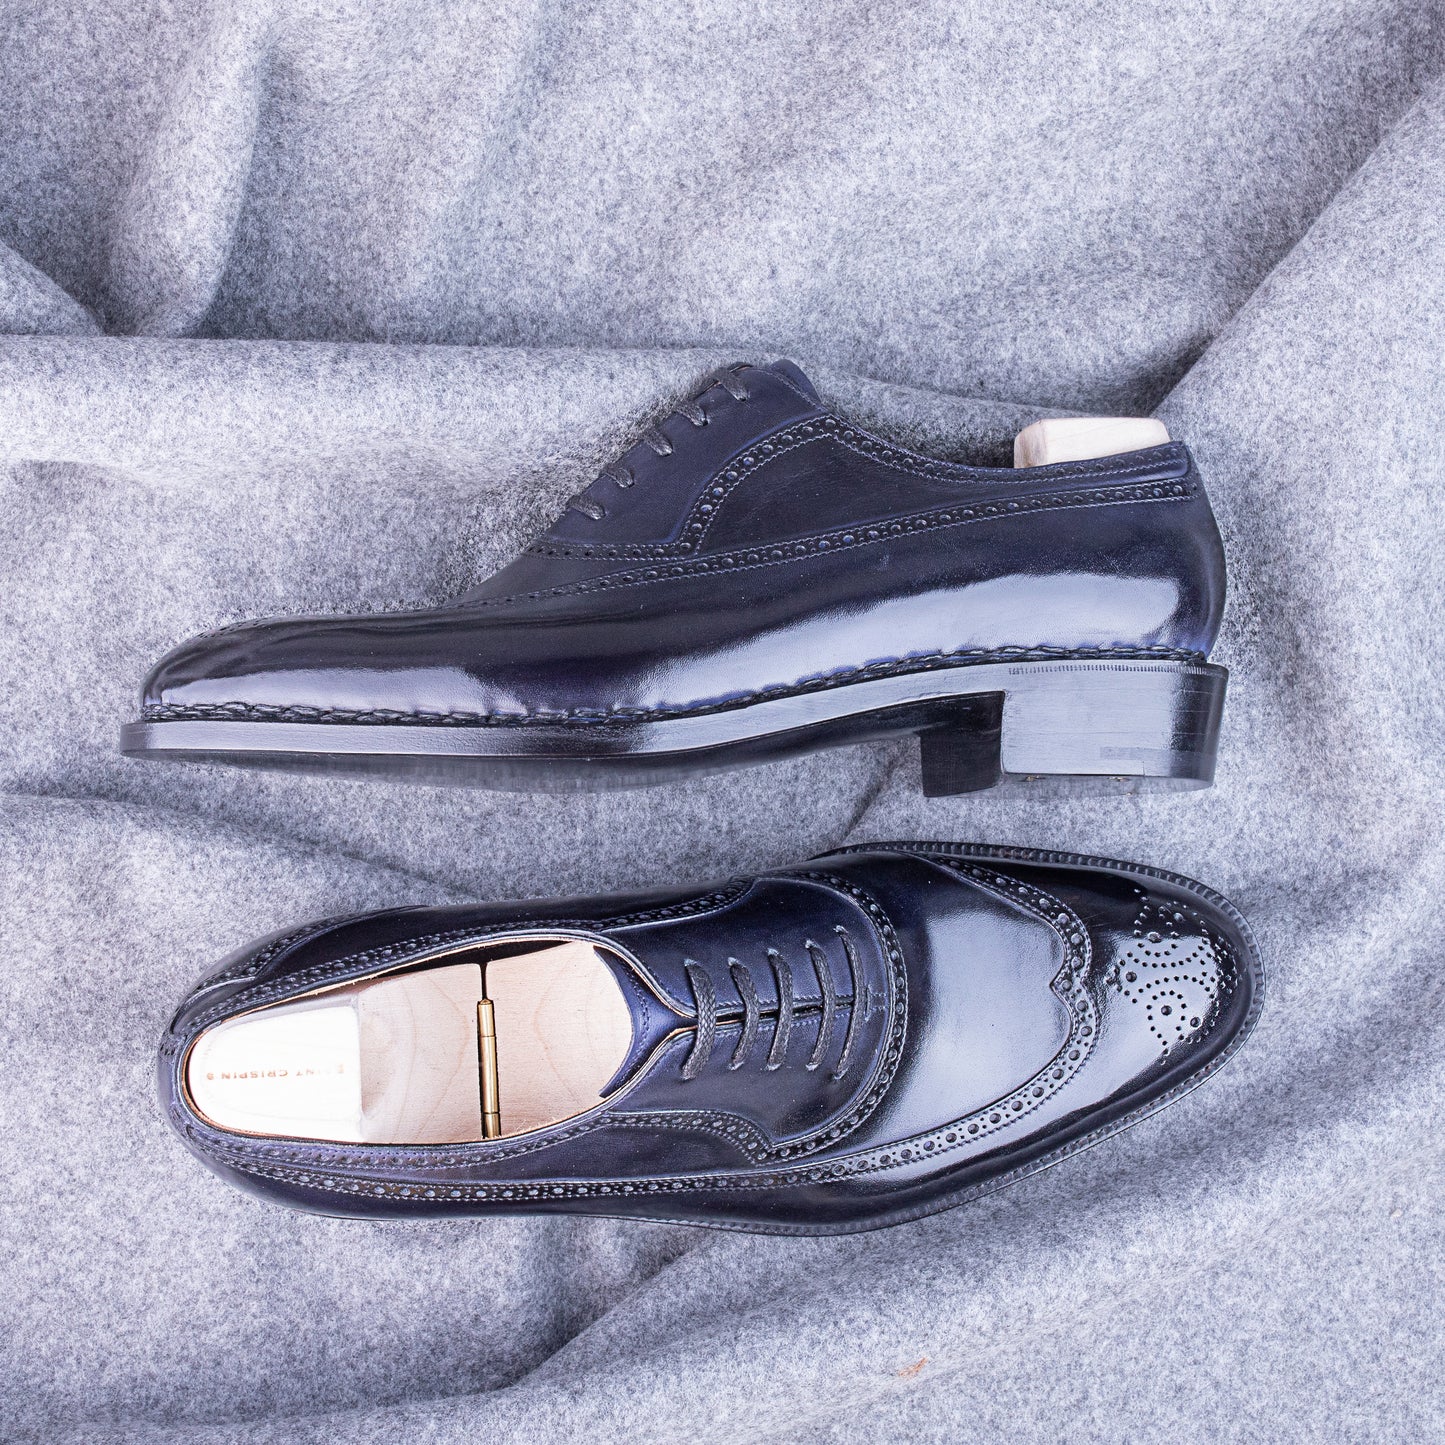 Brogued Oxford with higher Cuban heel